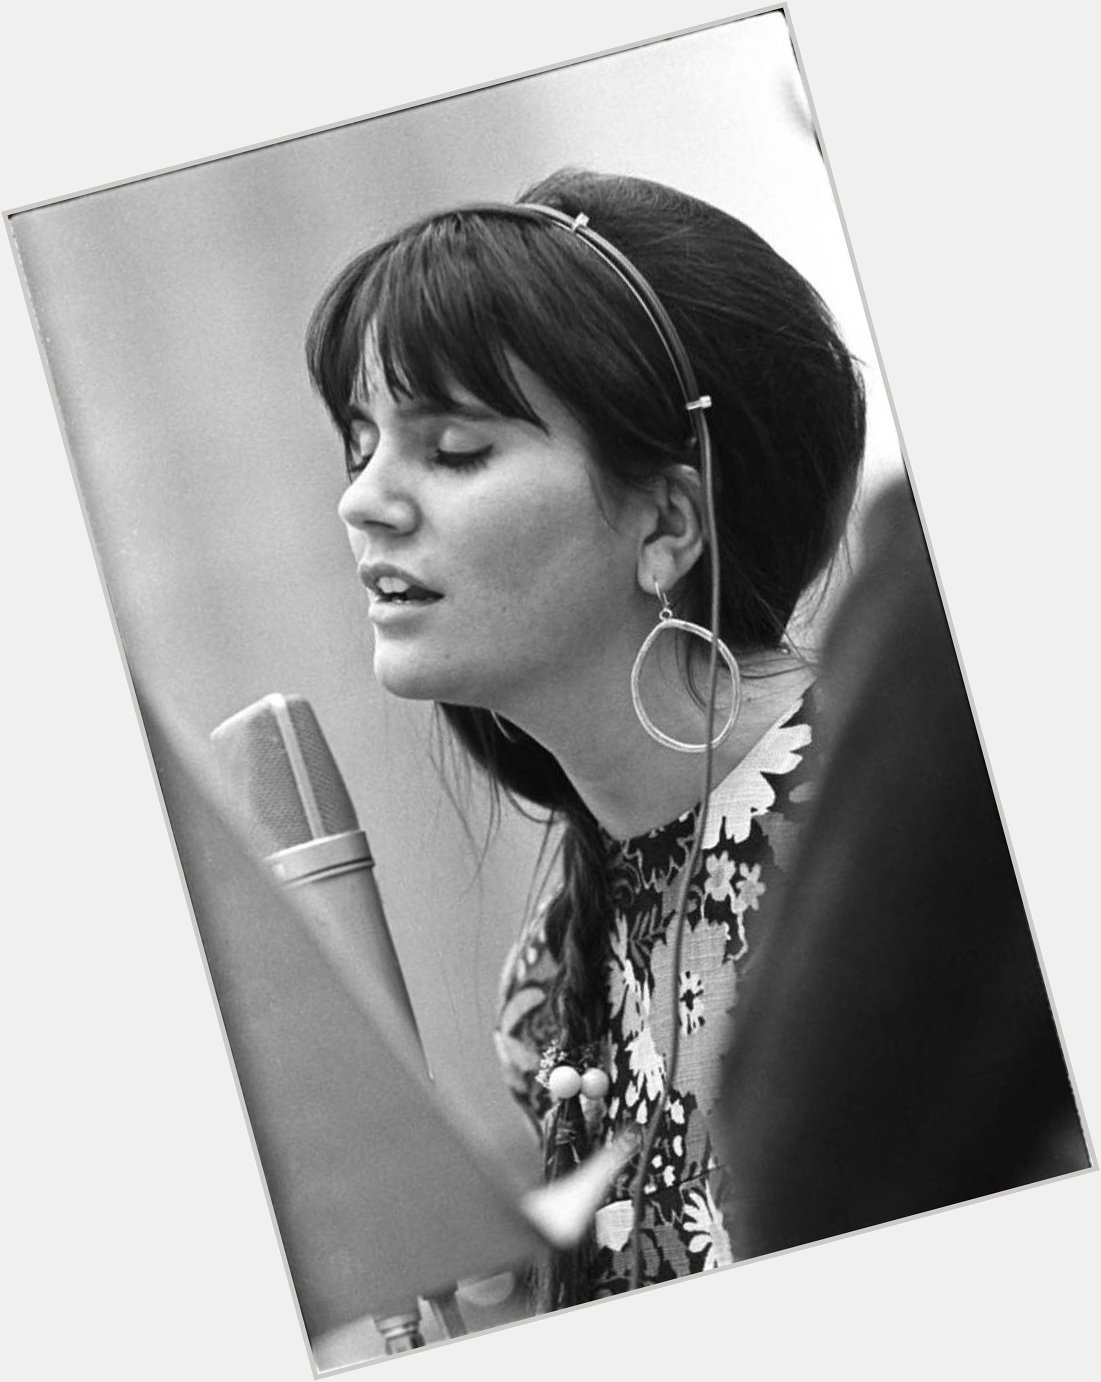 Happy 76th birthday to the amazing Linda Ronstadt who was born on this day in 1946. 